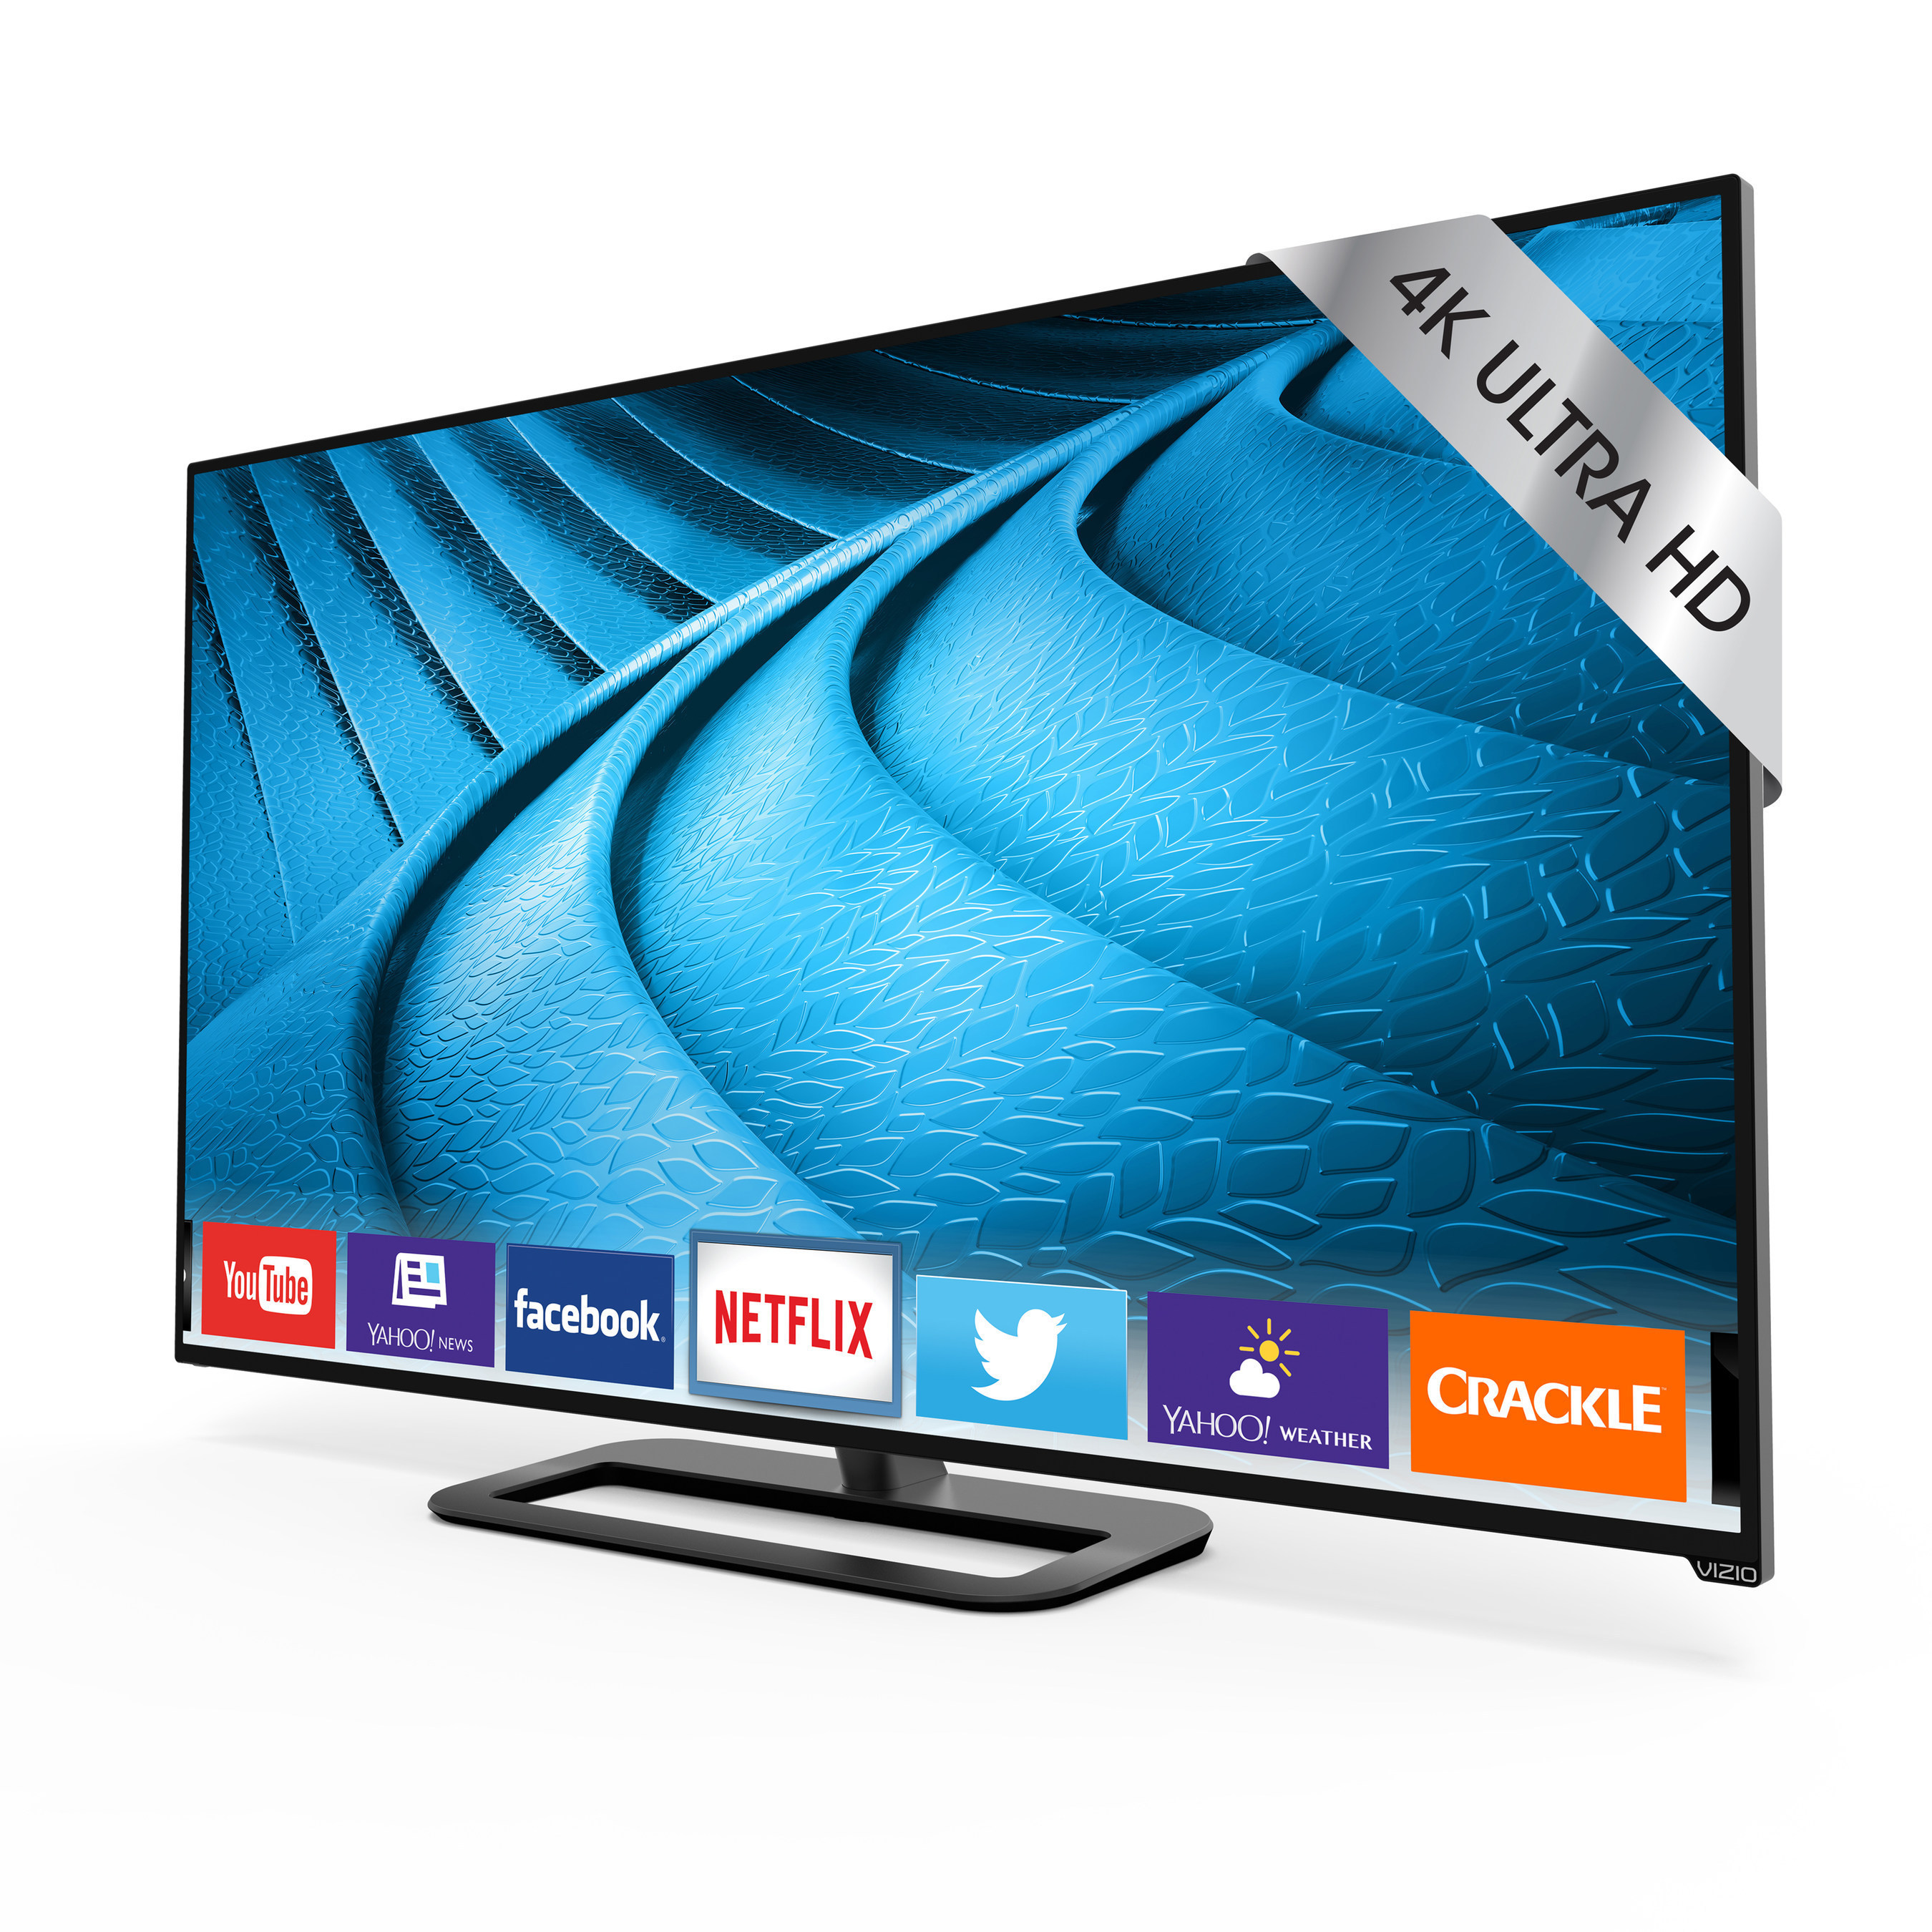 VIZIO Brings Ultra HD to Canada with Release of Award-Winning P-Series Ultra HD Full-Array LED Smart TV Collection. New Line-Up Combines Excellent Picture Quality and Advanced Performance for the Ultimate Entertainment Experience